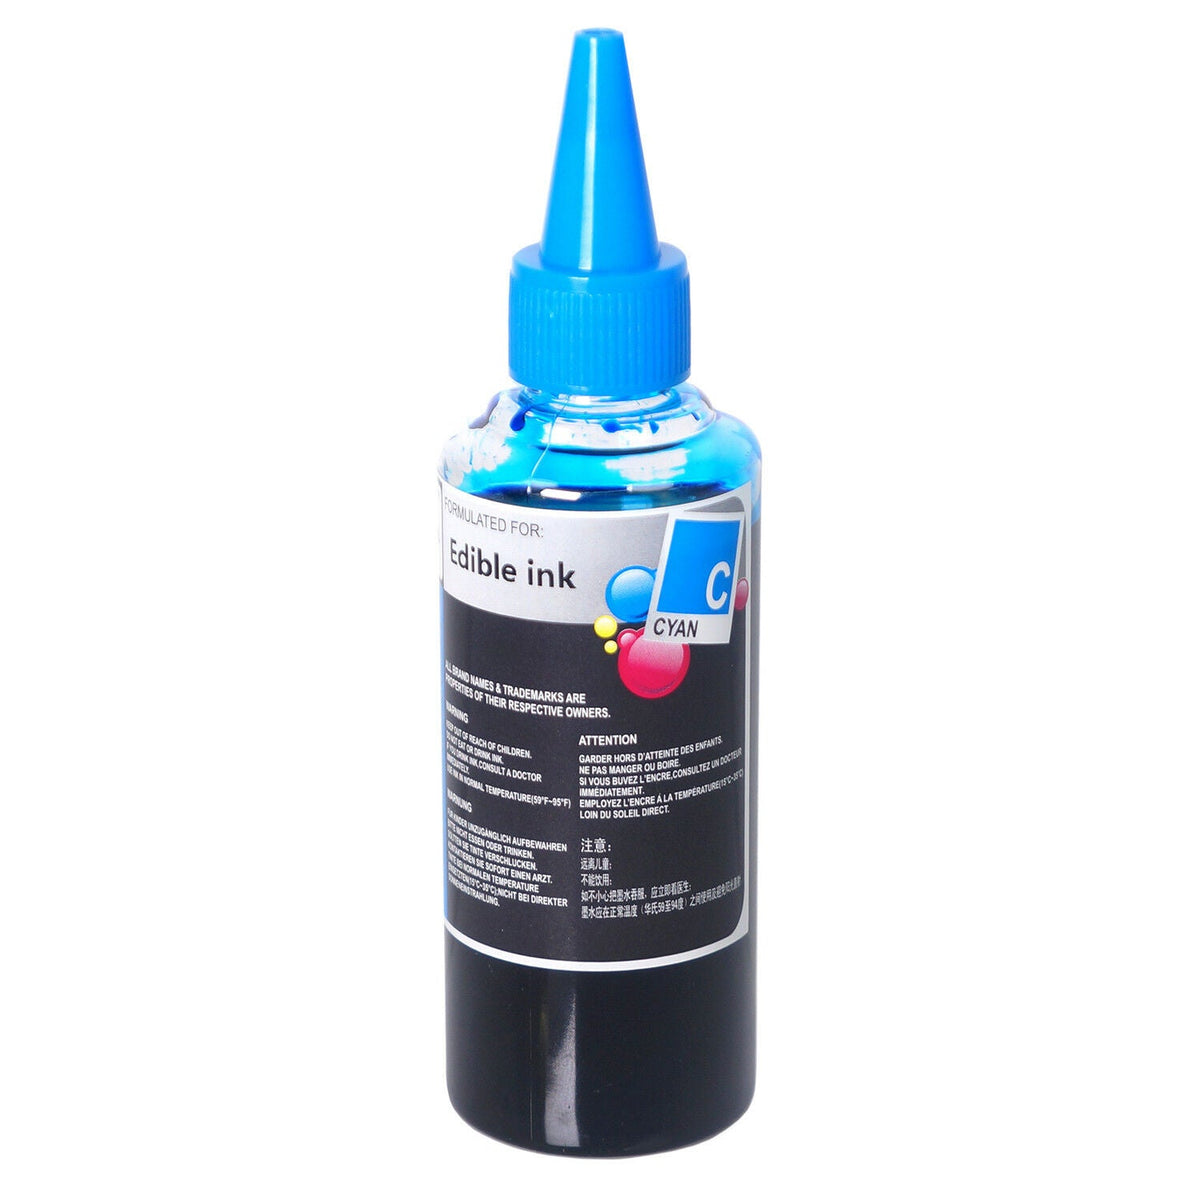 100ml Cyan Edible Ink Refill Bottle Compatible for Canon Cartridge